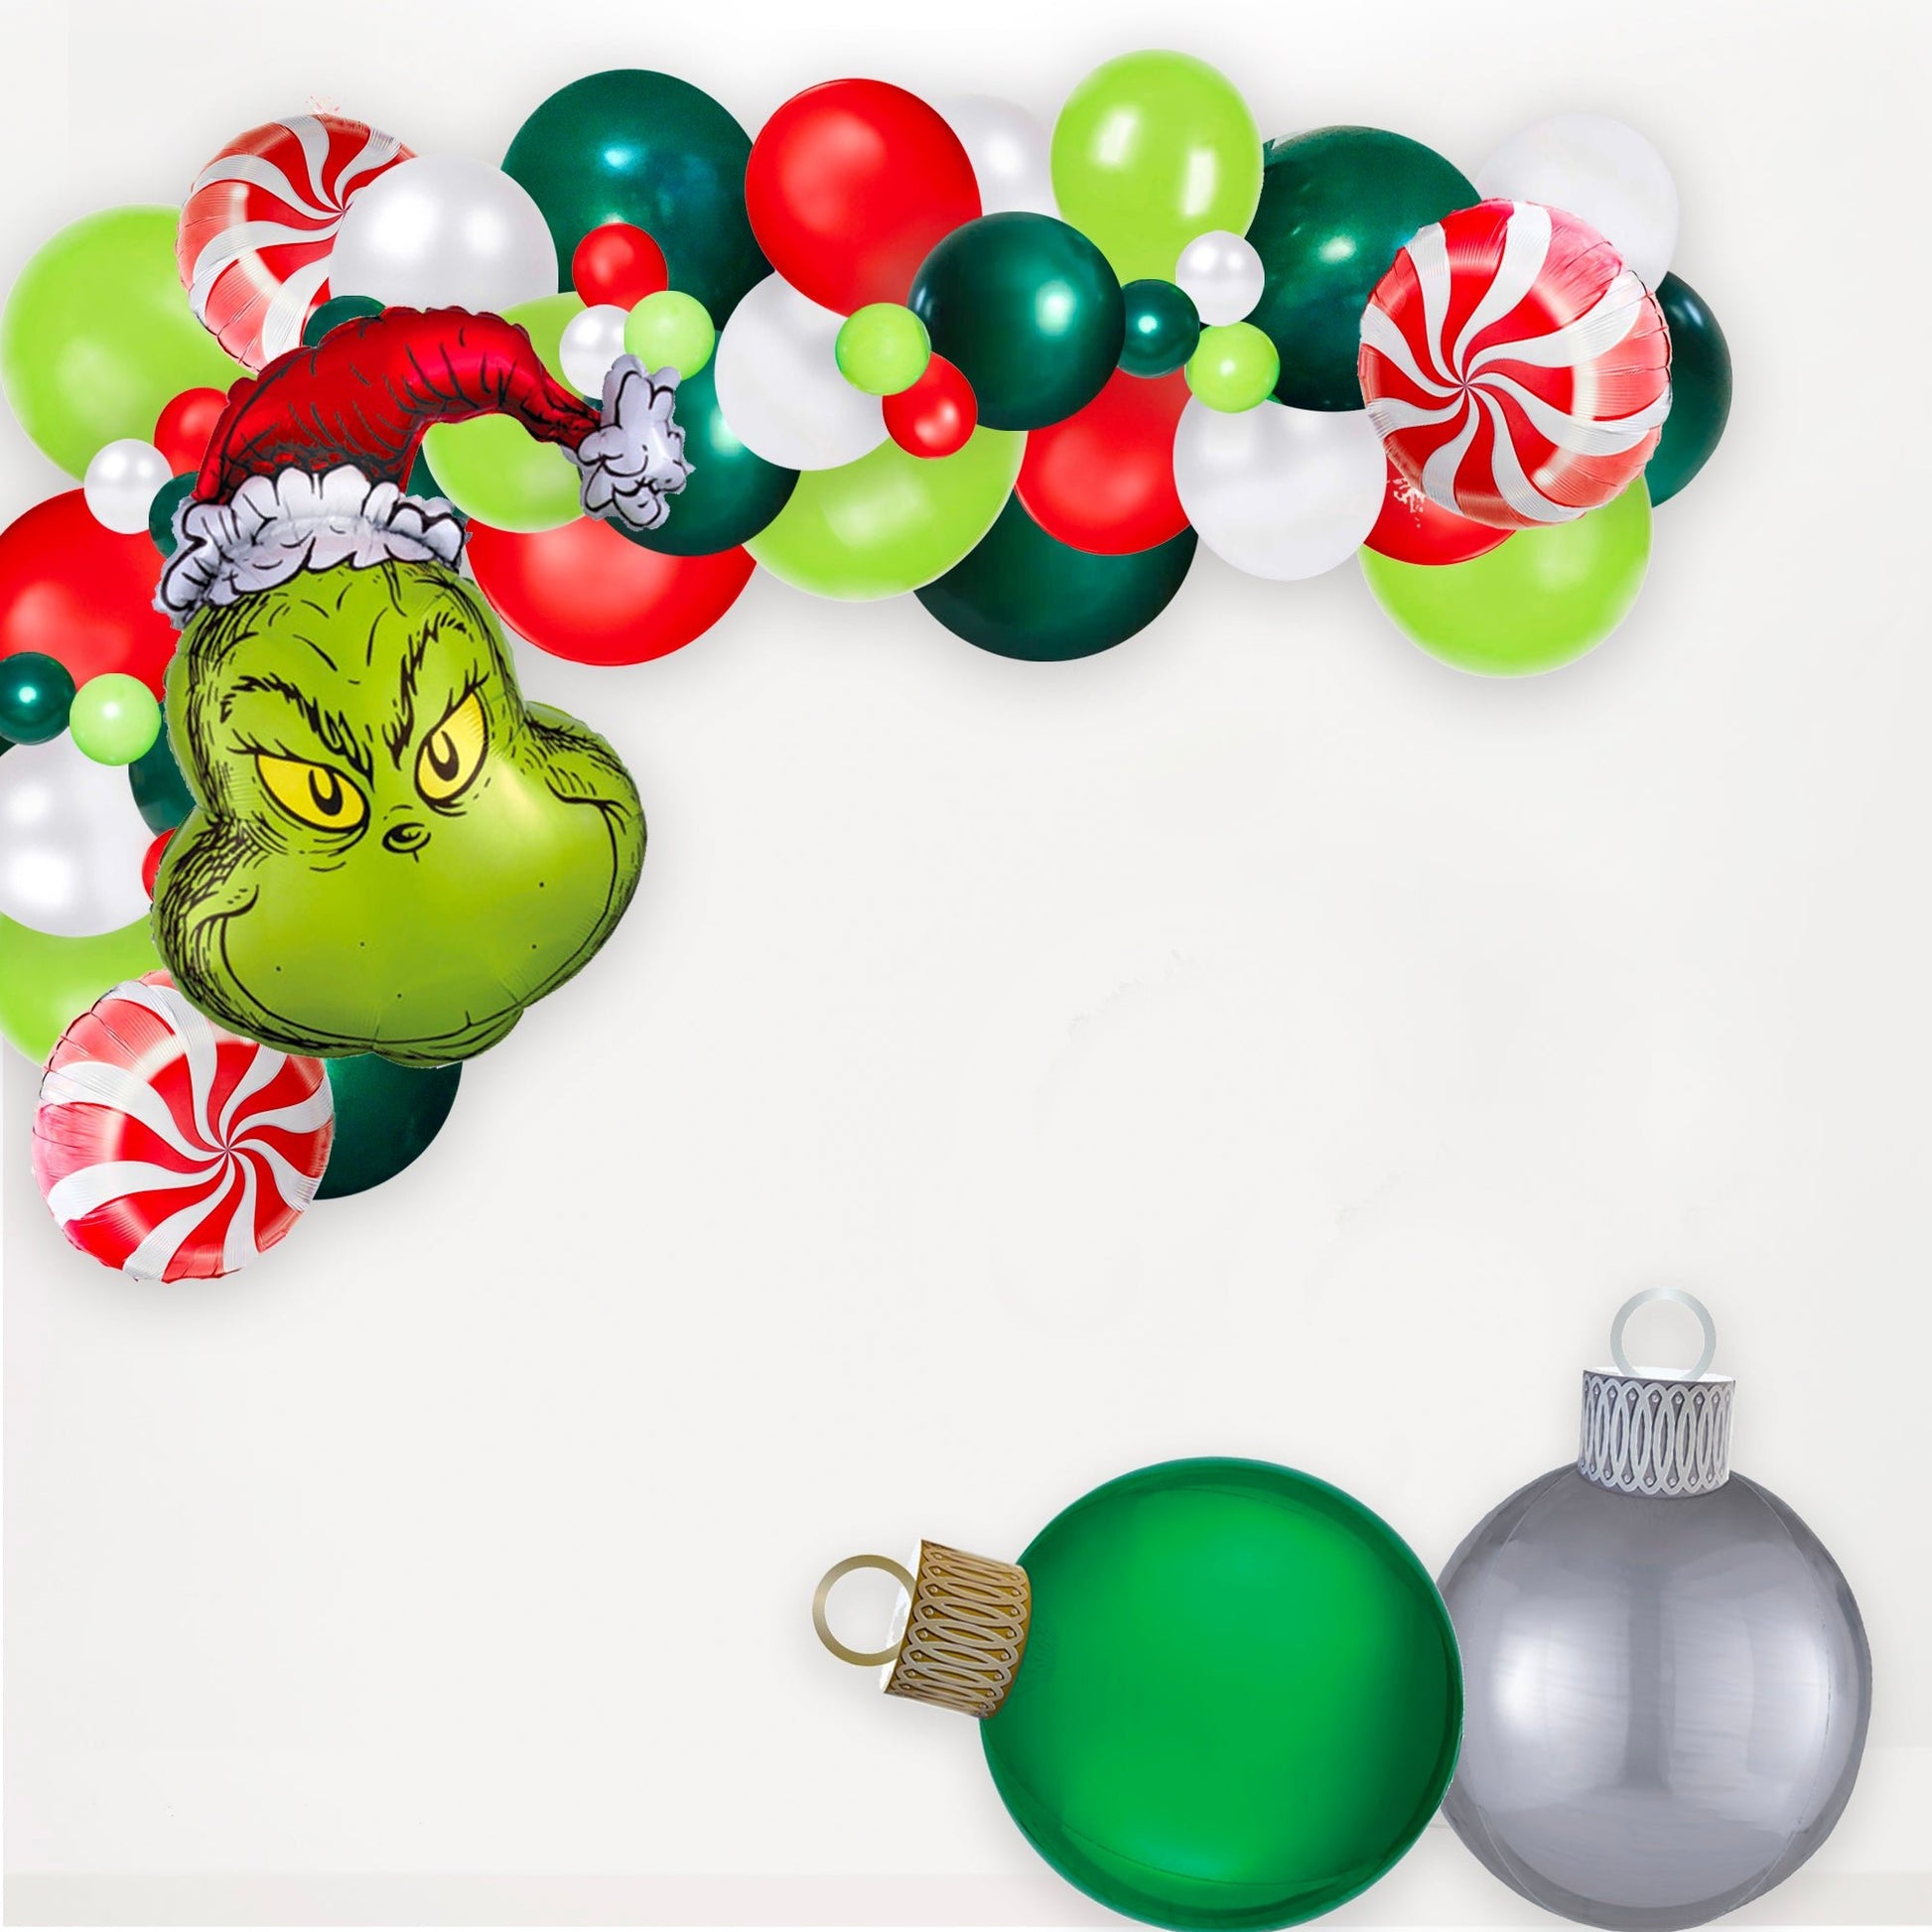 3D Silver Christmas Ornament Balloon (20-Inches) - Ellie's Party Supply